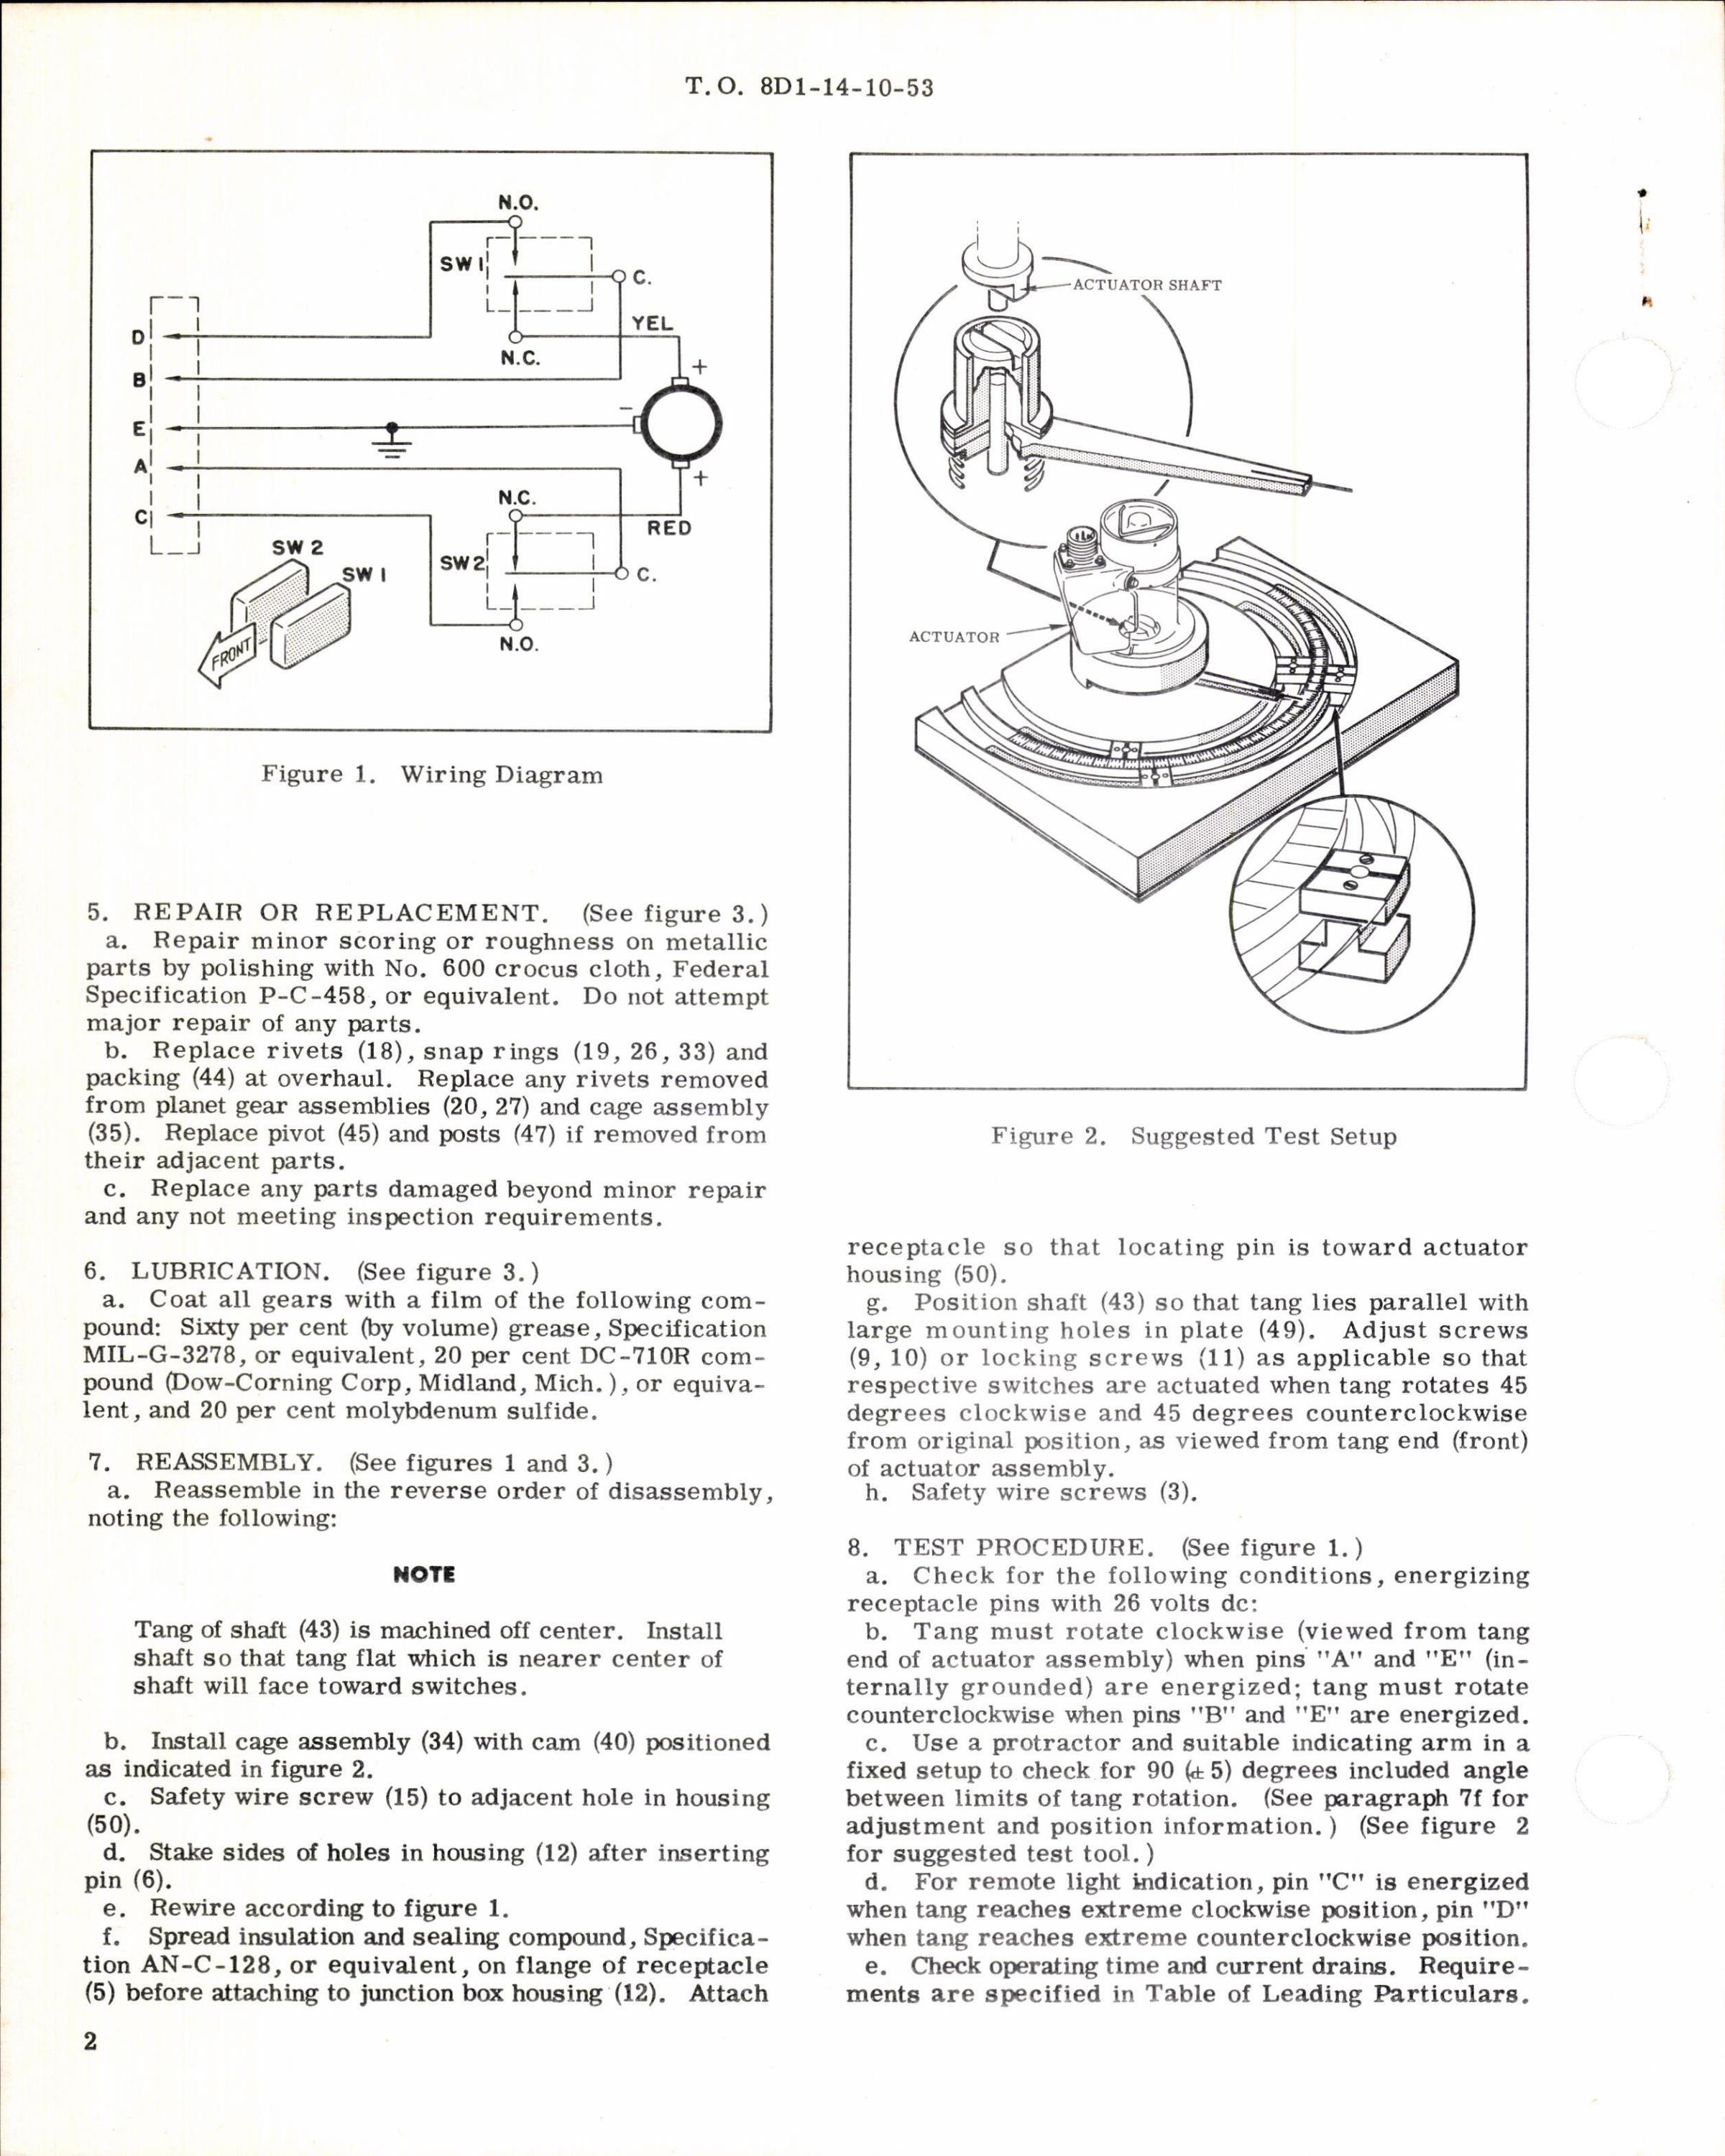 Sample page 2 from AirCorps Library document: Instructions w Parts Breakdown for Actuator Assembly Part 106520